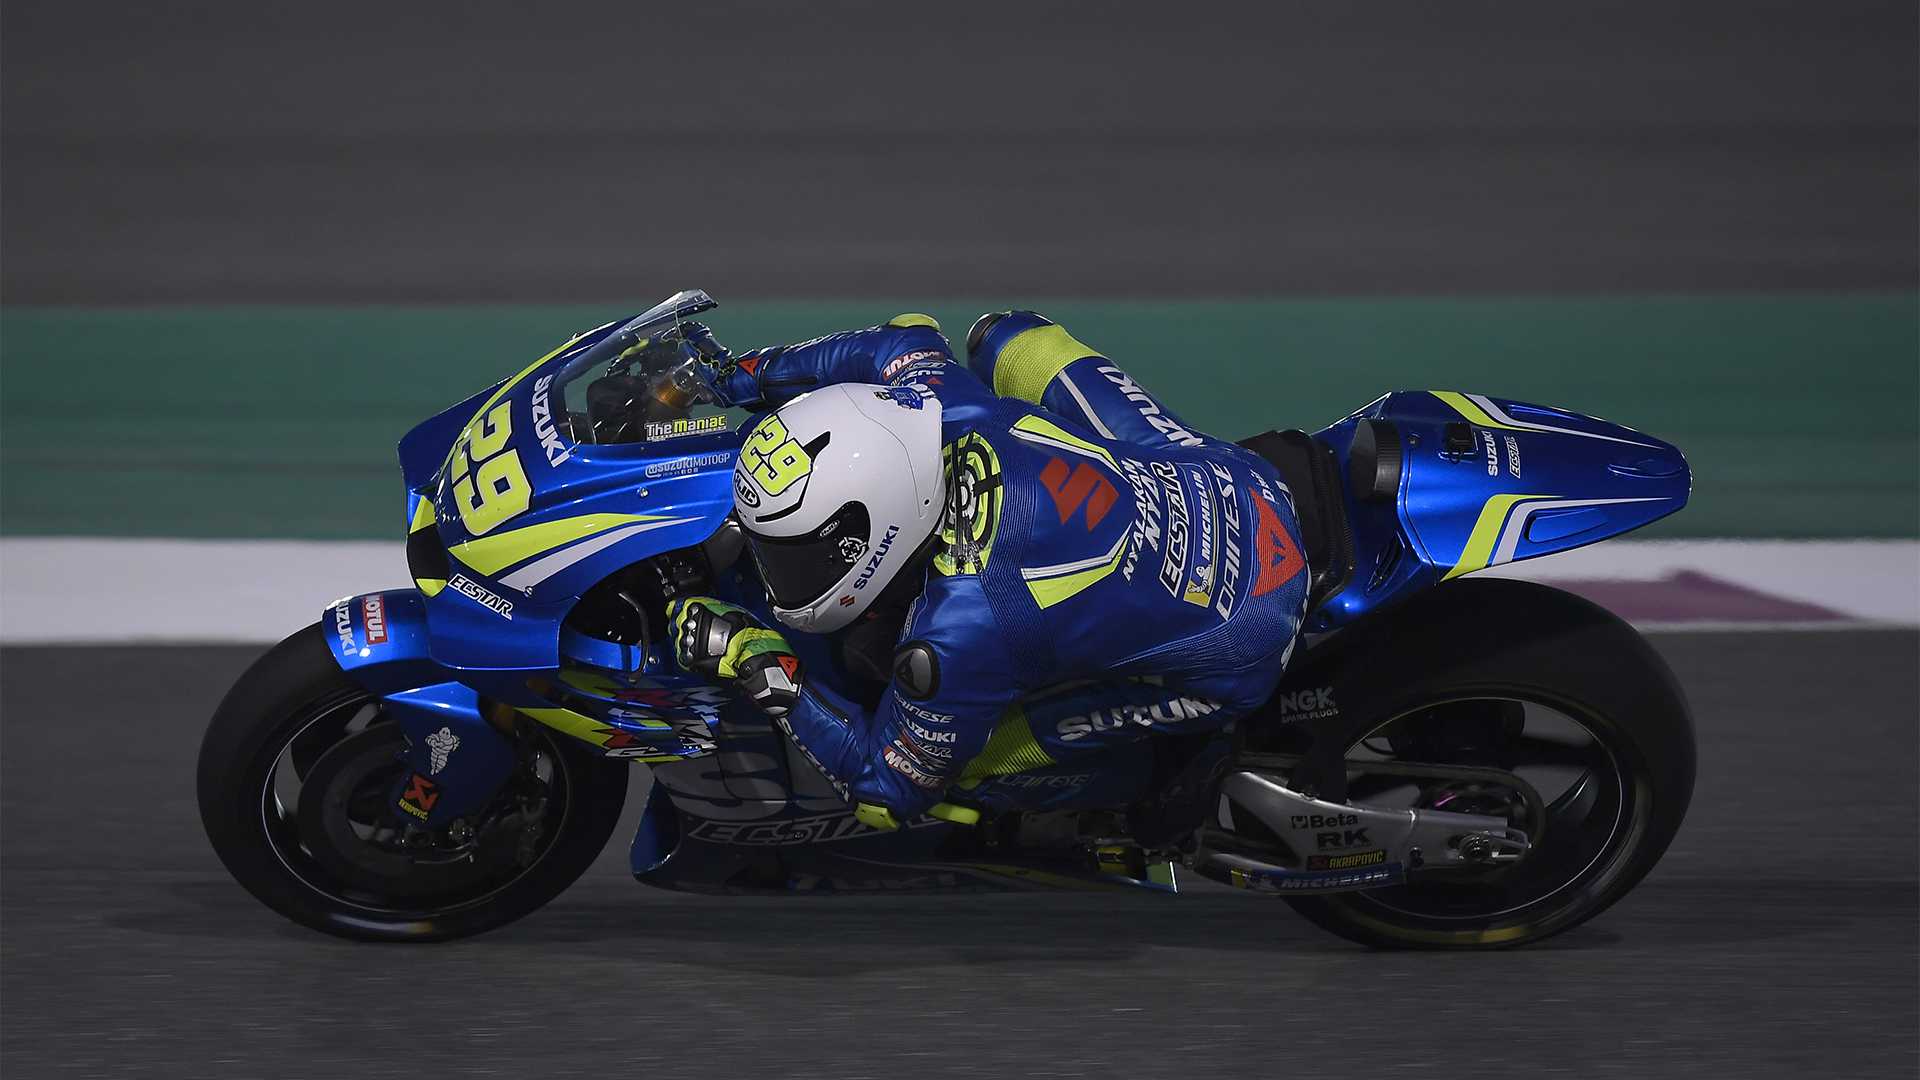 Iannone lights up the desert on Day 2